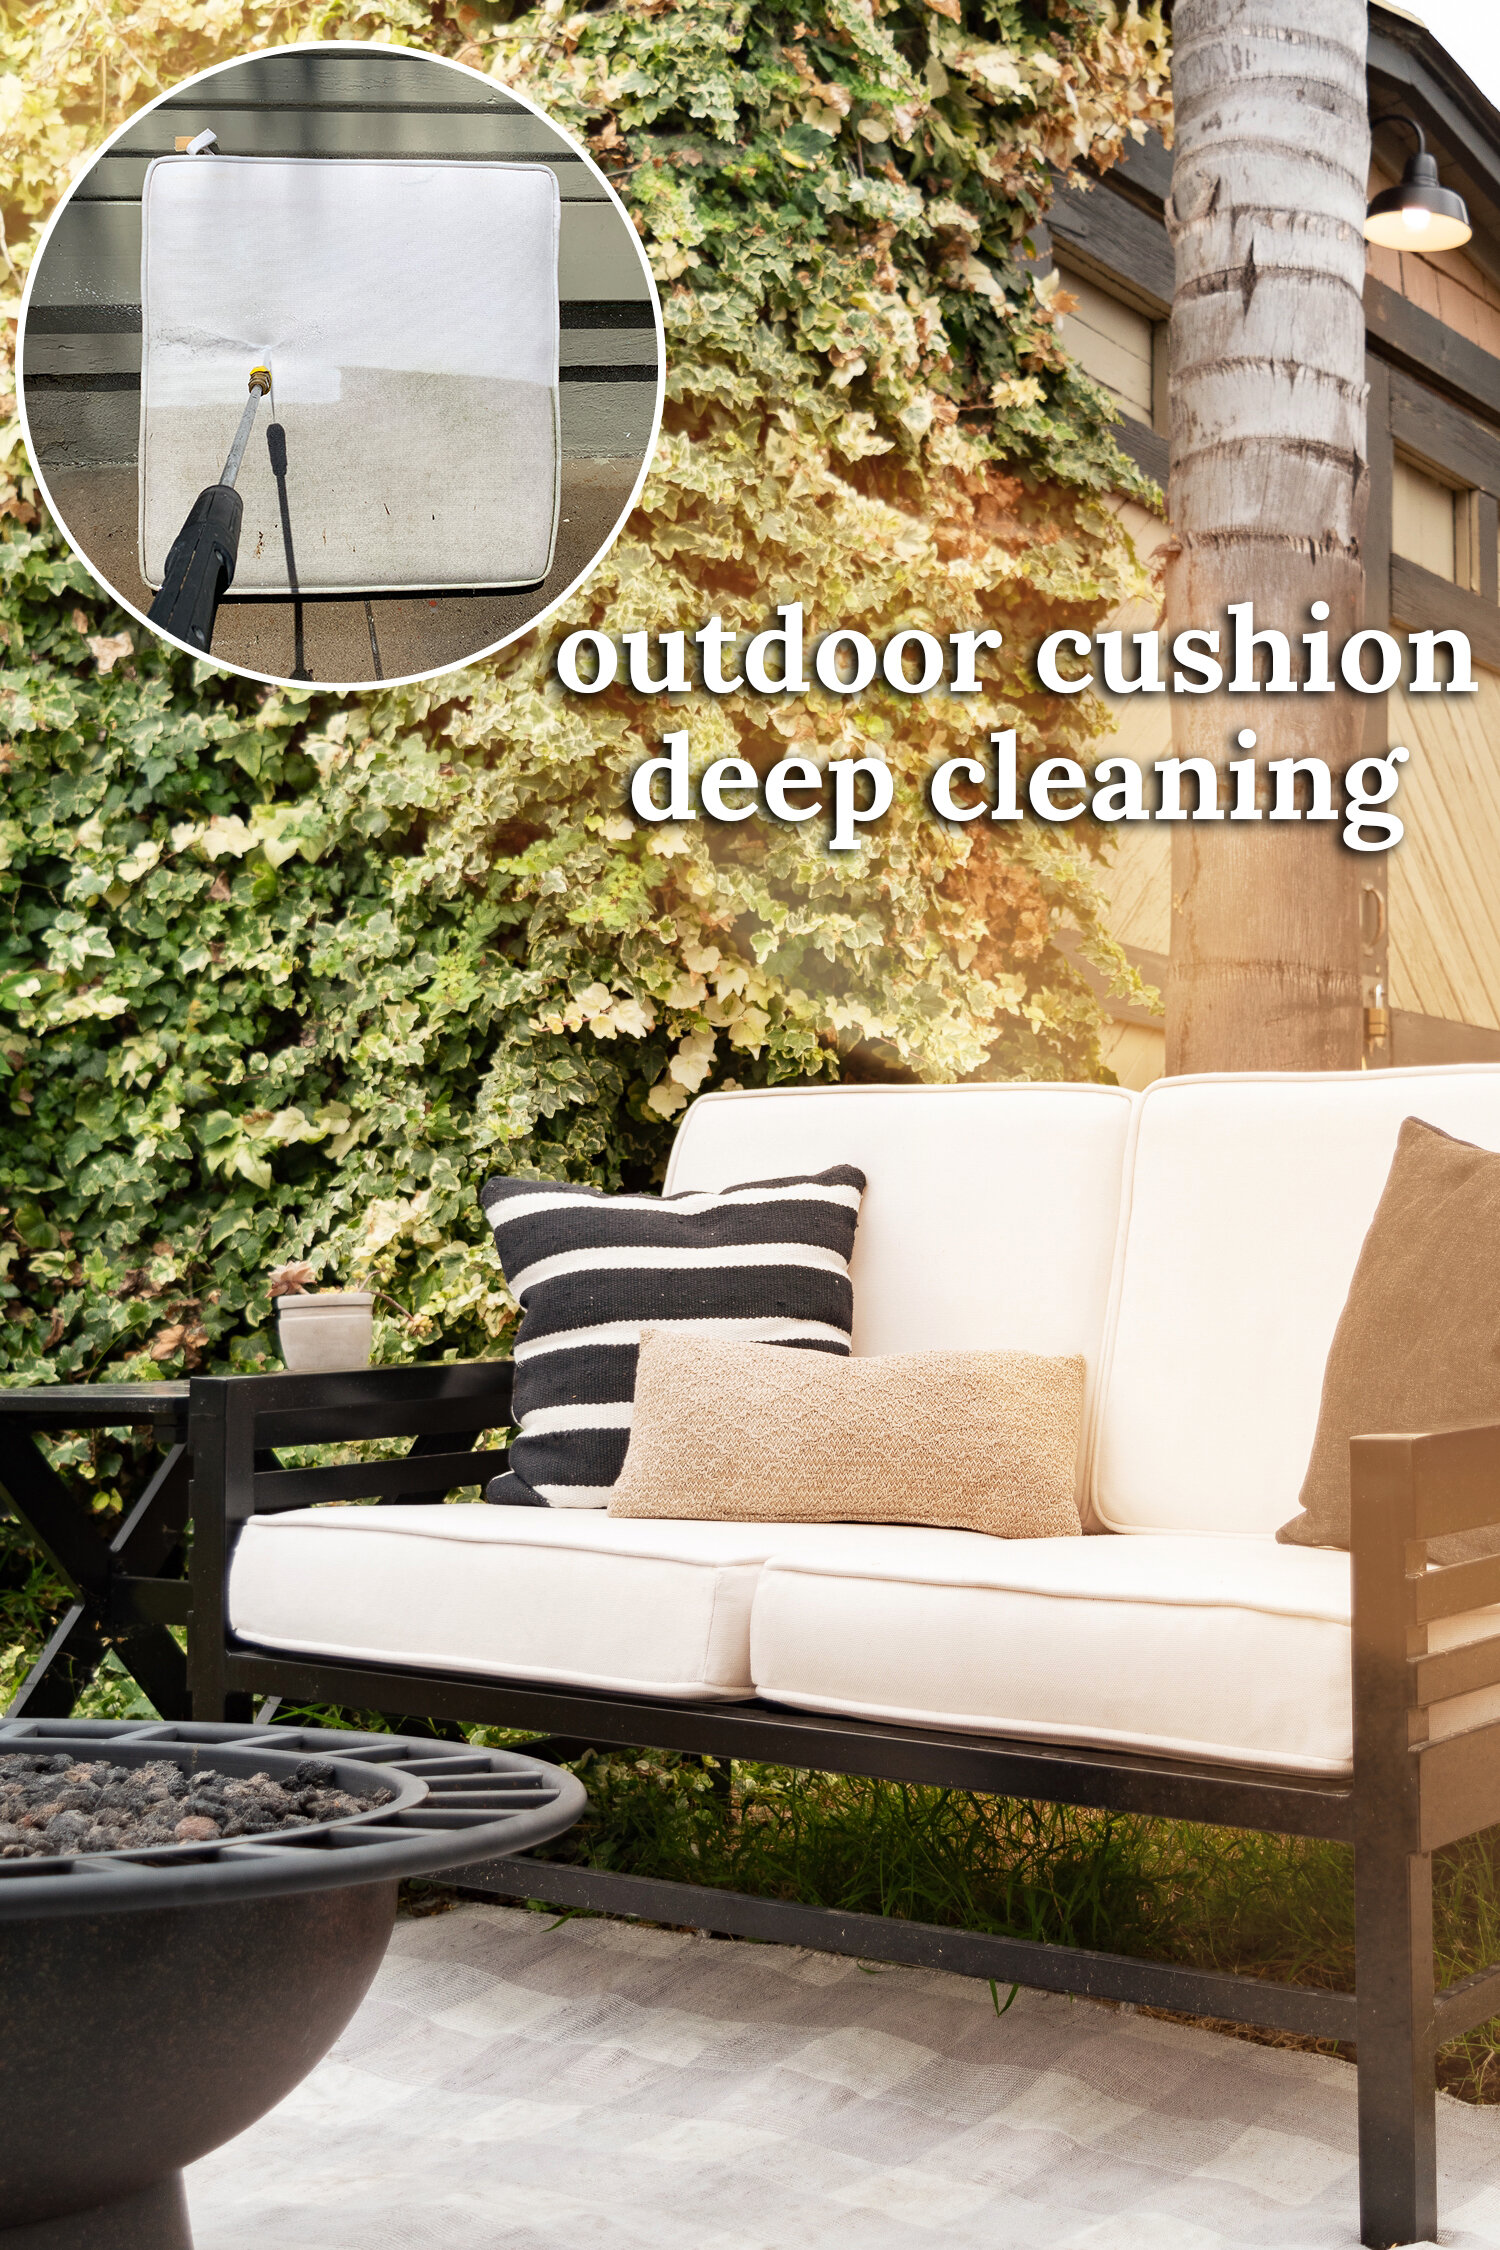 Pressure Washing My Outdoor Cushions, How To Clean Outdoor Cushion Covers In Washing Machine